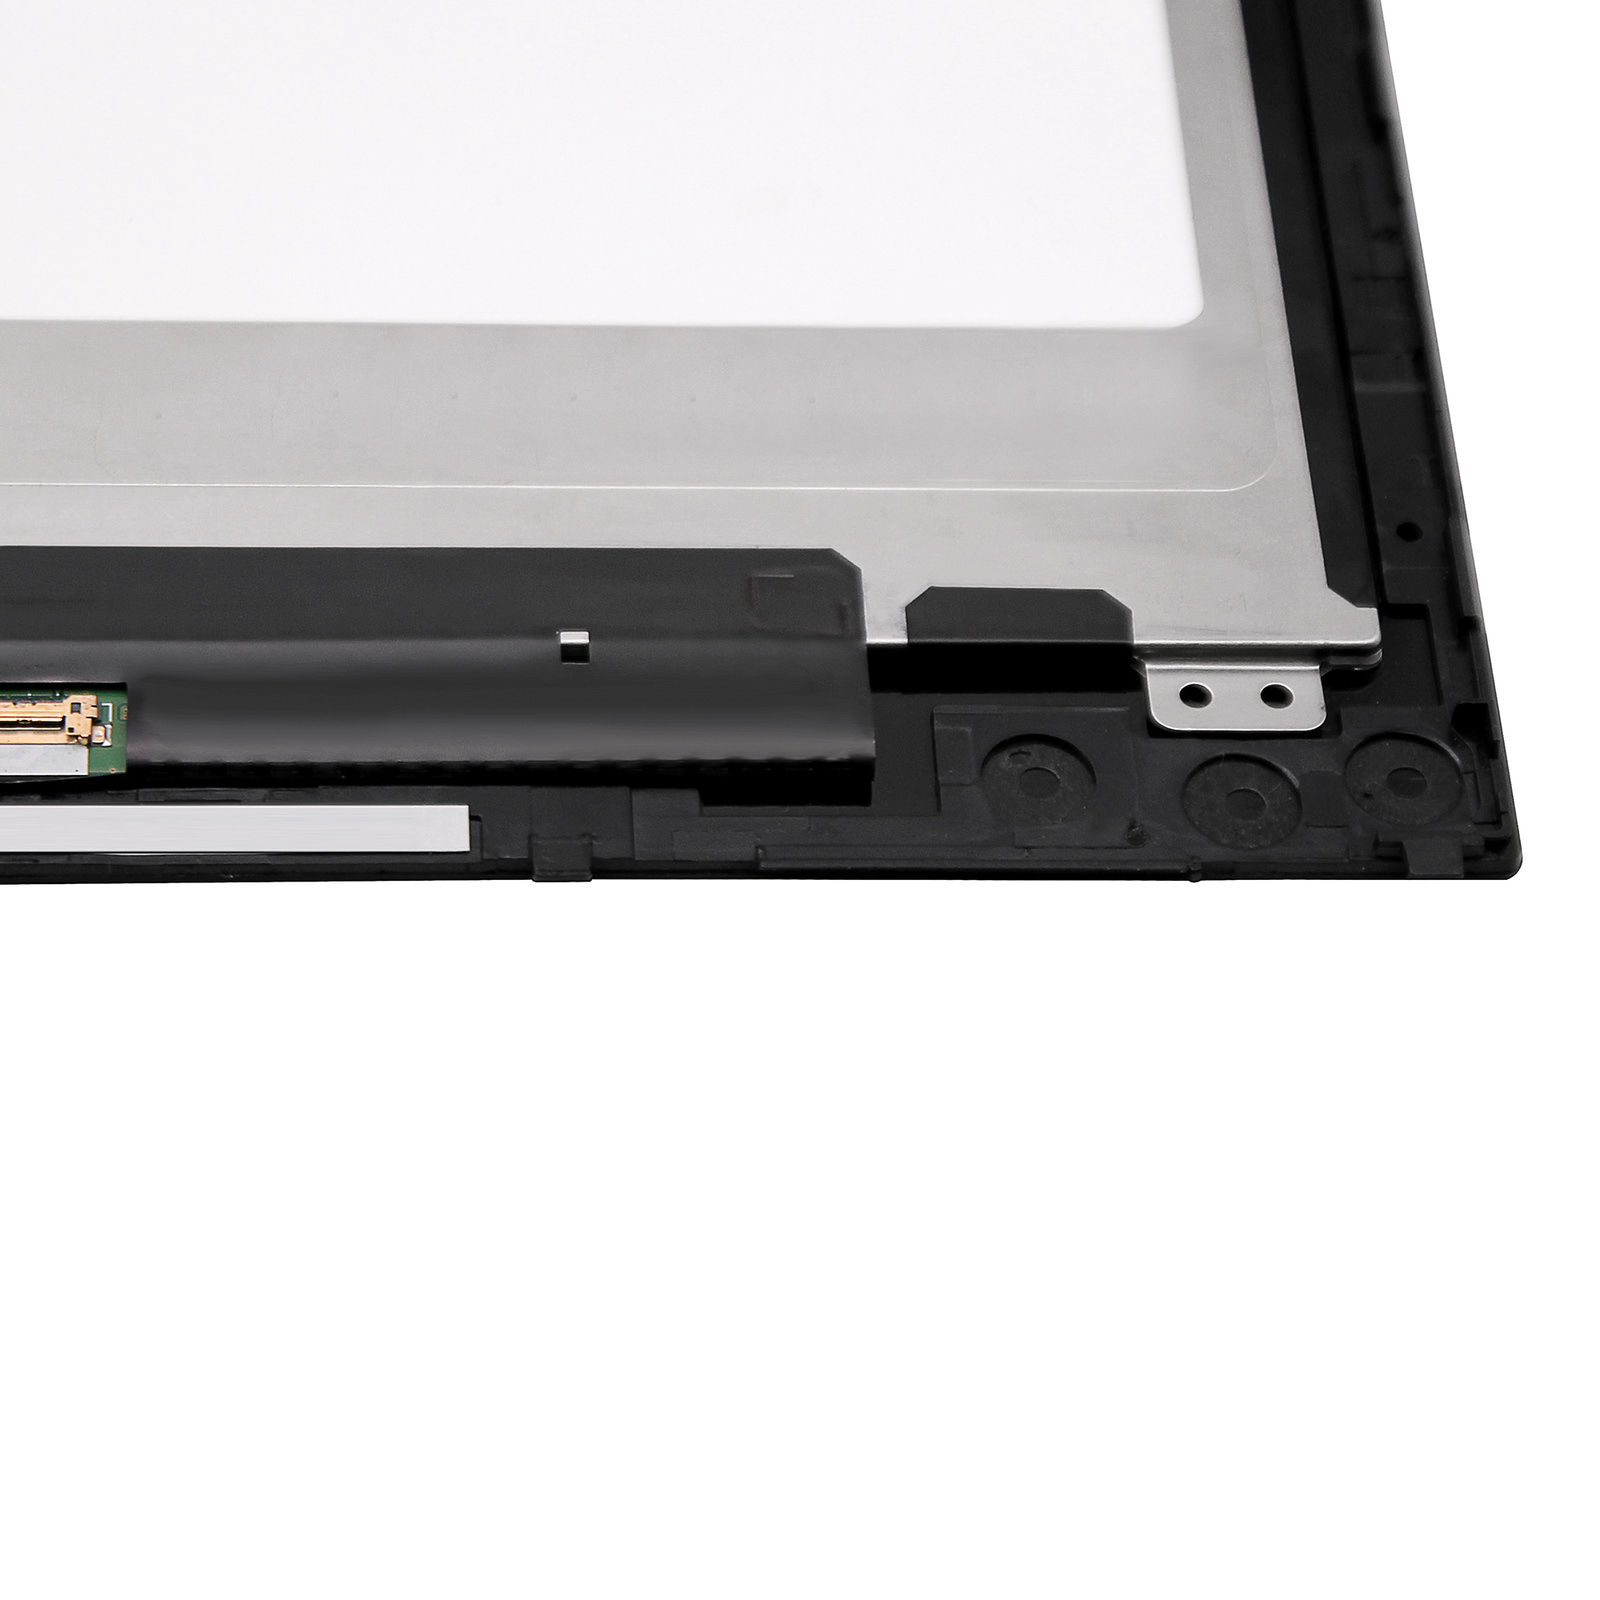 Screen Display Replacement For HP PAVILION X360 13-U104UR LCD Touch Digitizer Assembly